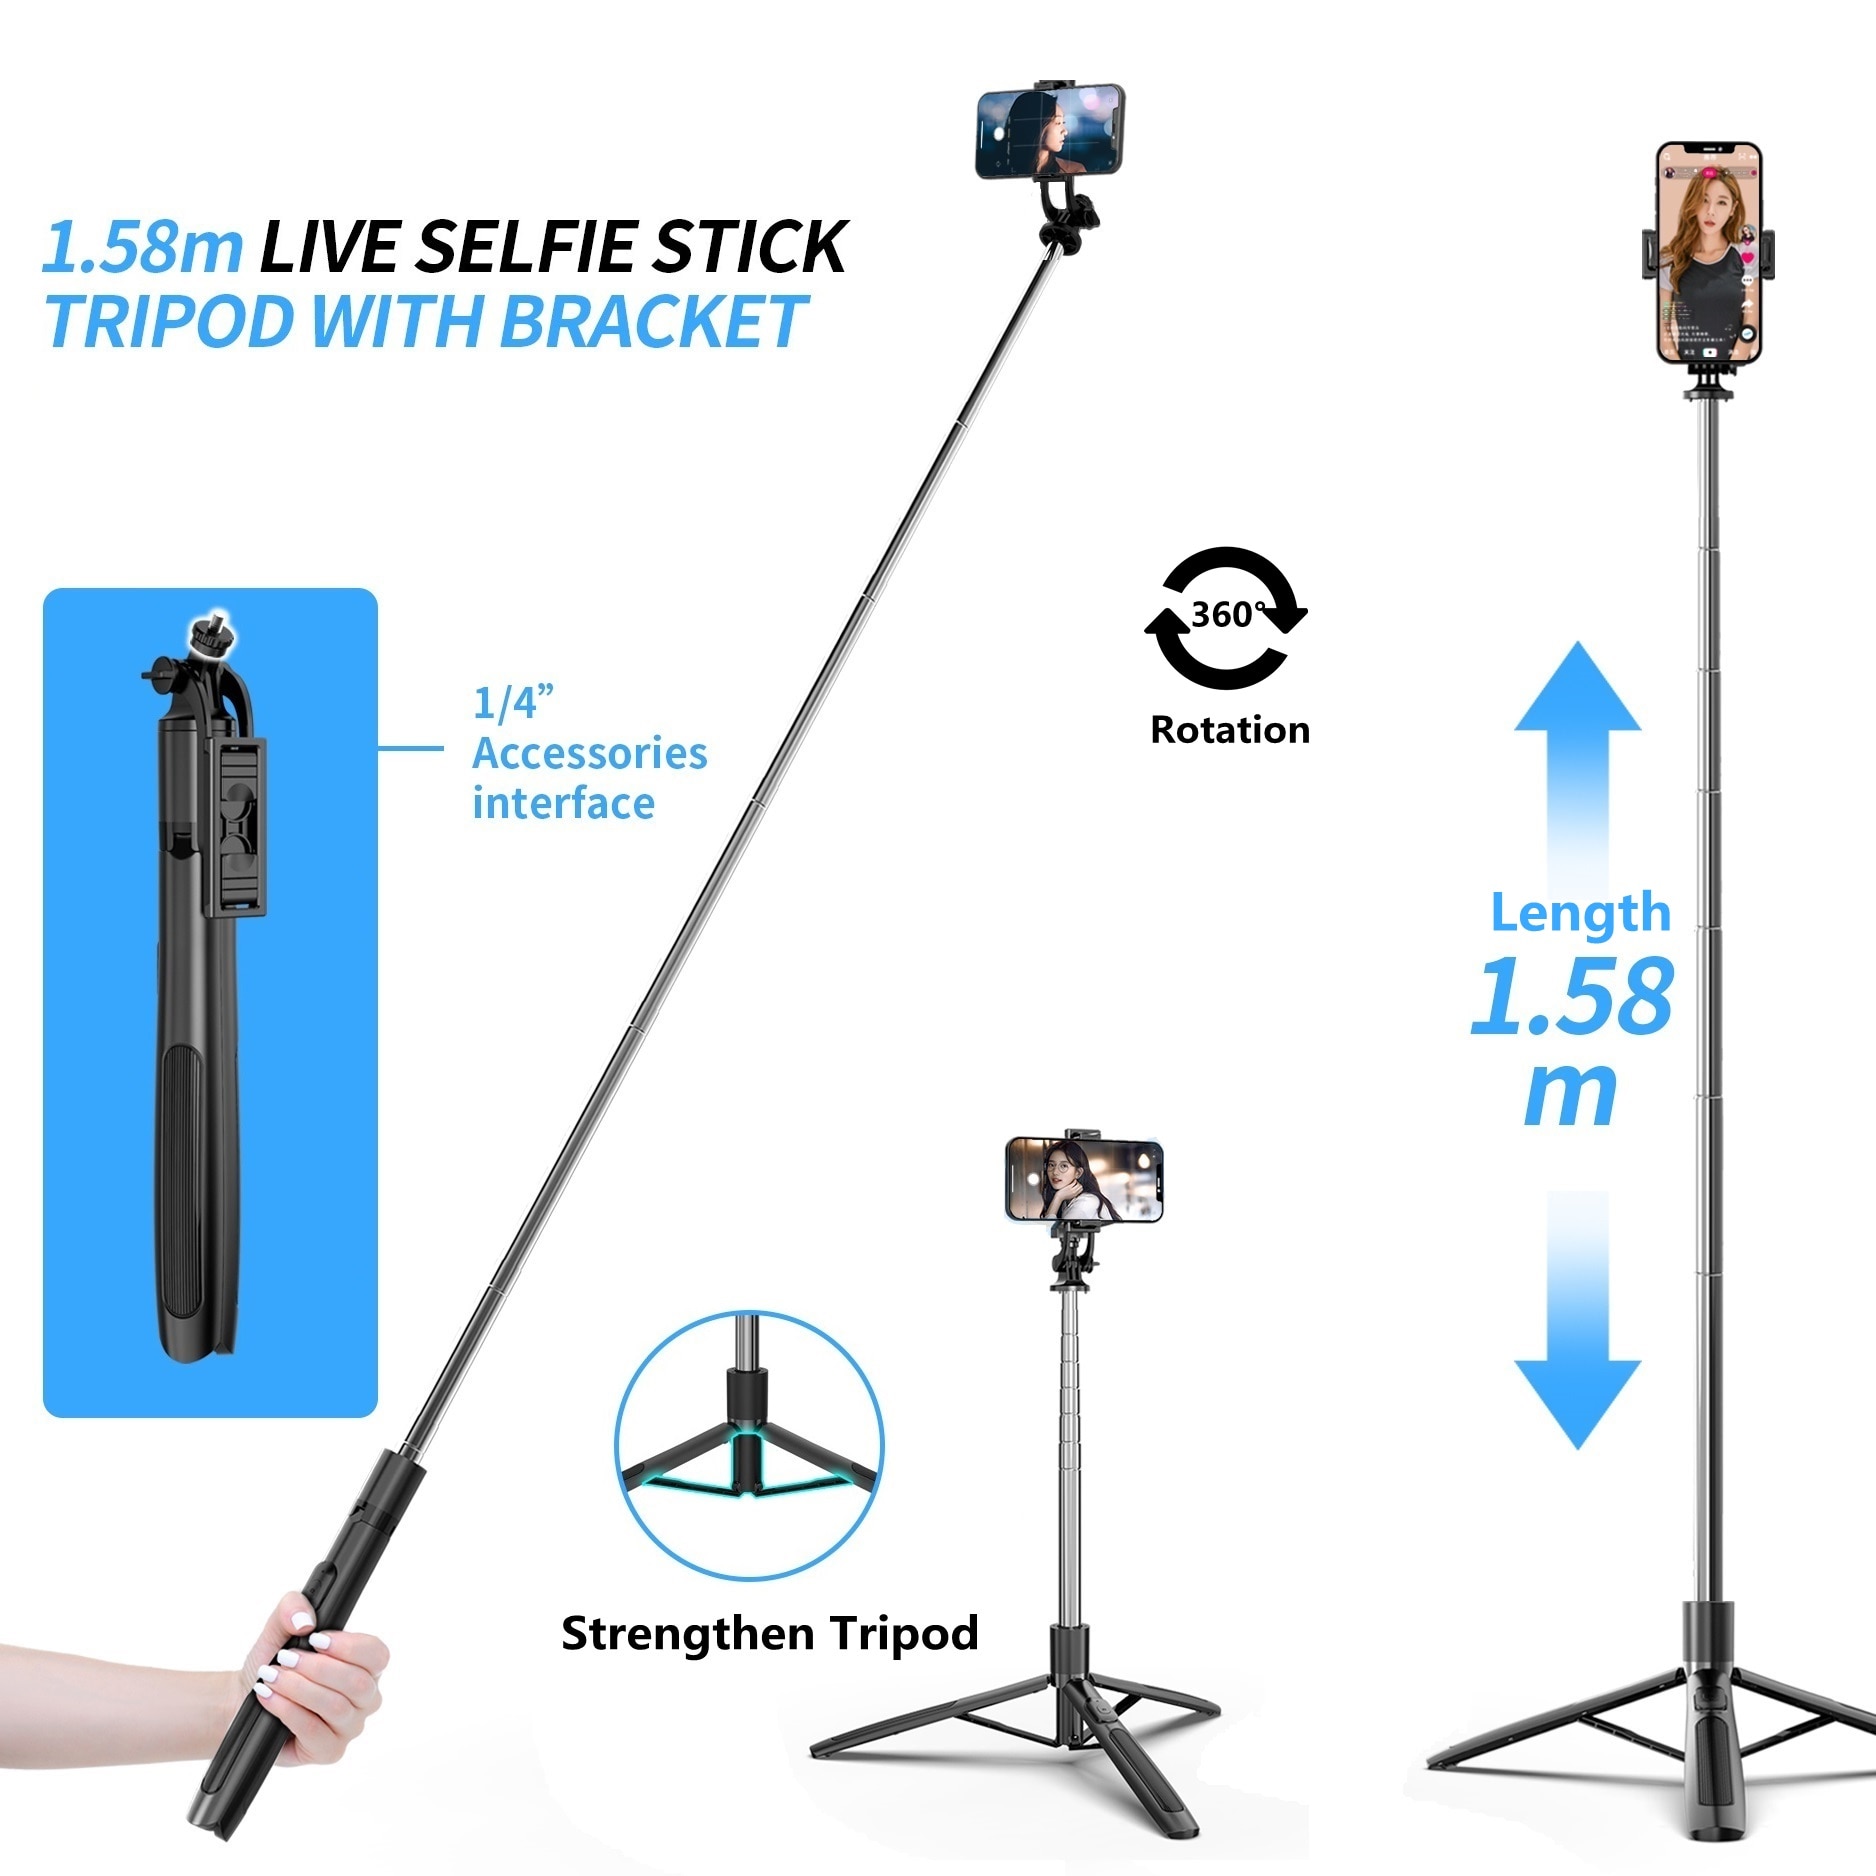 COOL DIER 1580mm New Wireless Selfie Stick Tripod Foldable Monopod With Fill light For Gopro Action Cameras Smartphones Selfie